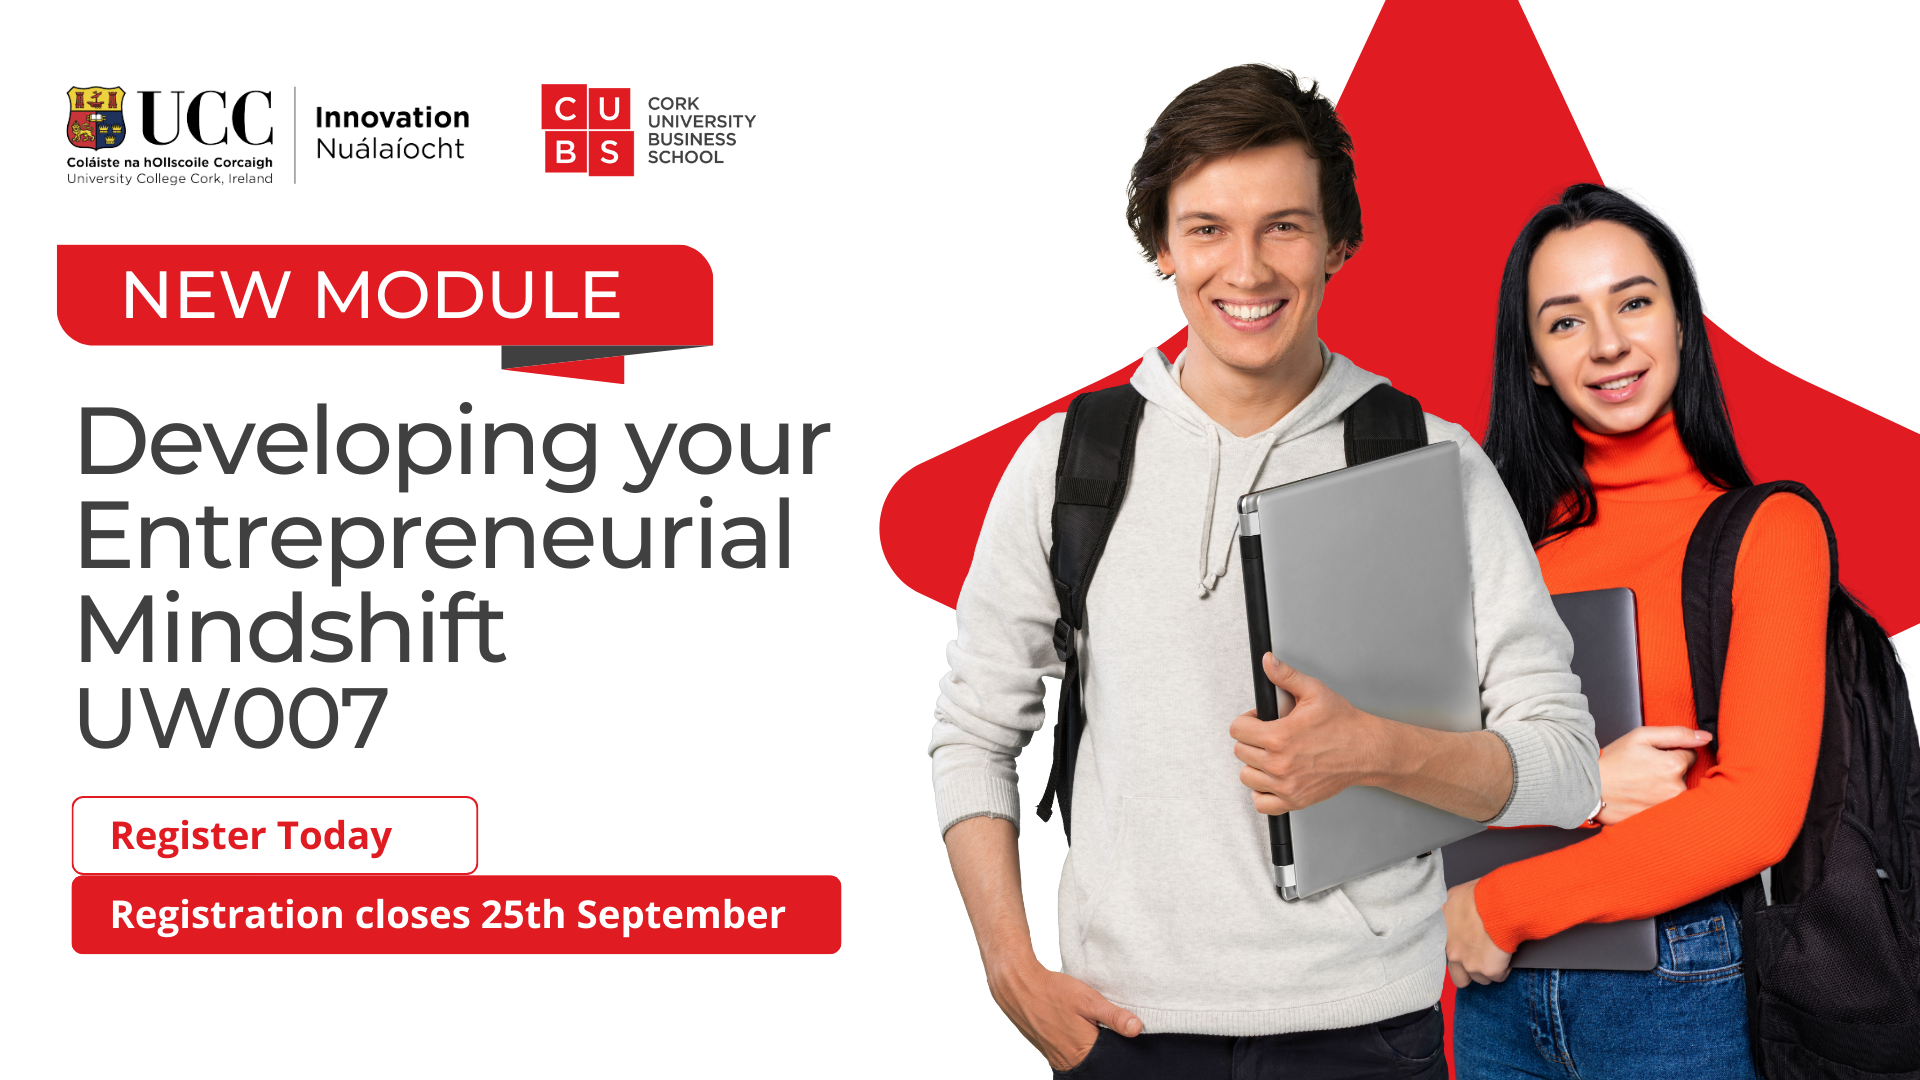 CUBS and UCC Innovation Launch University-Wide Module on Developing an Entrepreneurial Mindshift